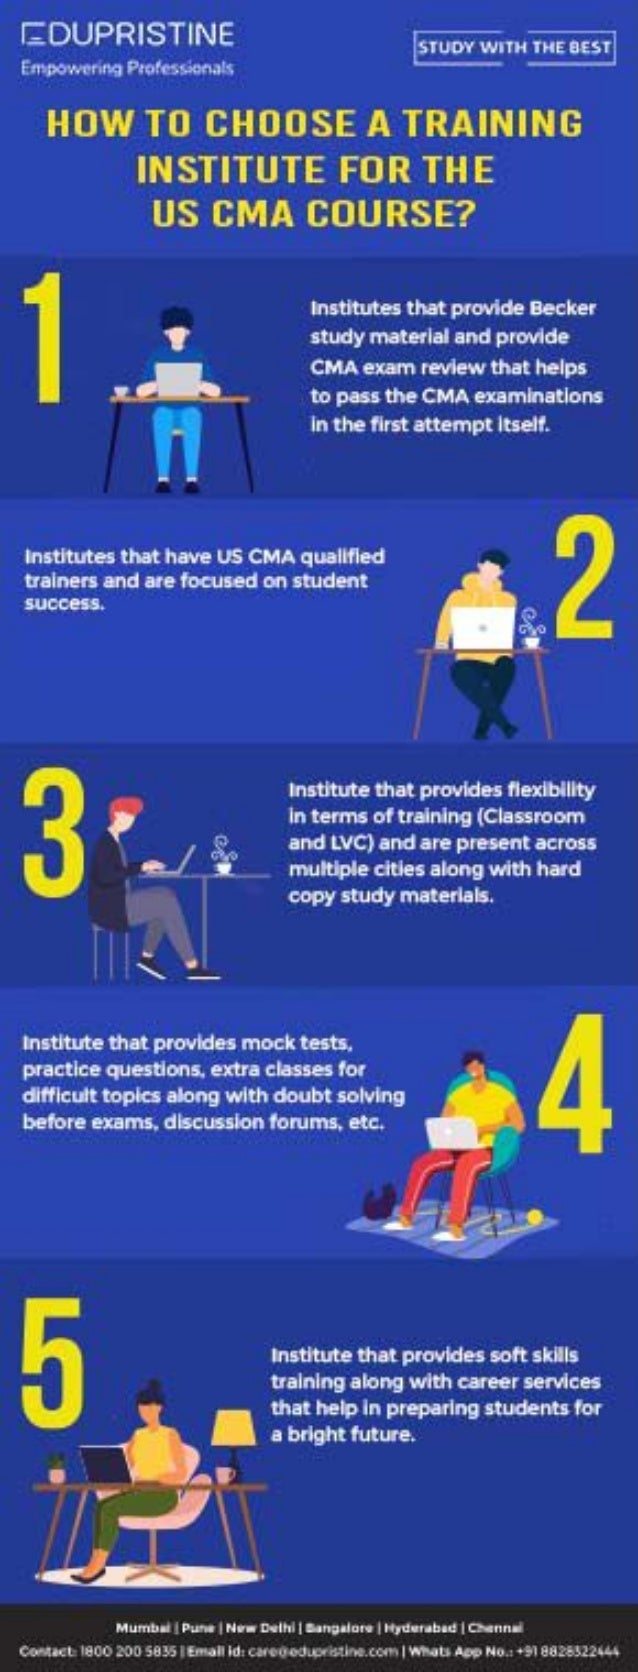 How to choose a training institute for the US CMA course?